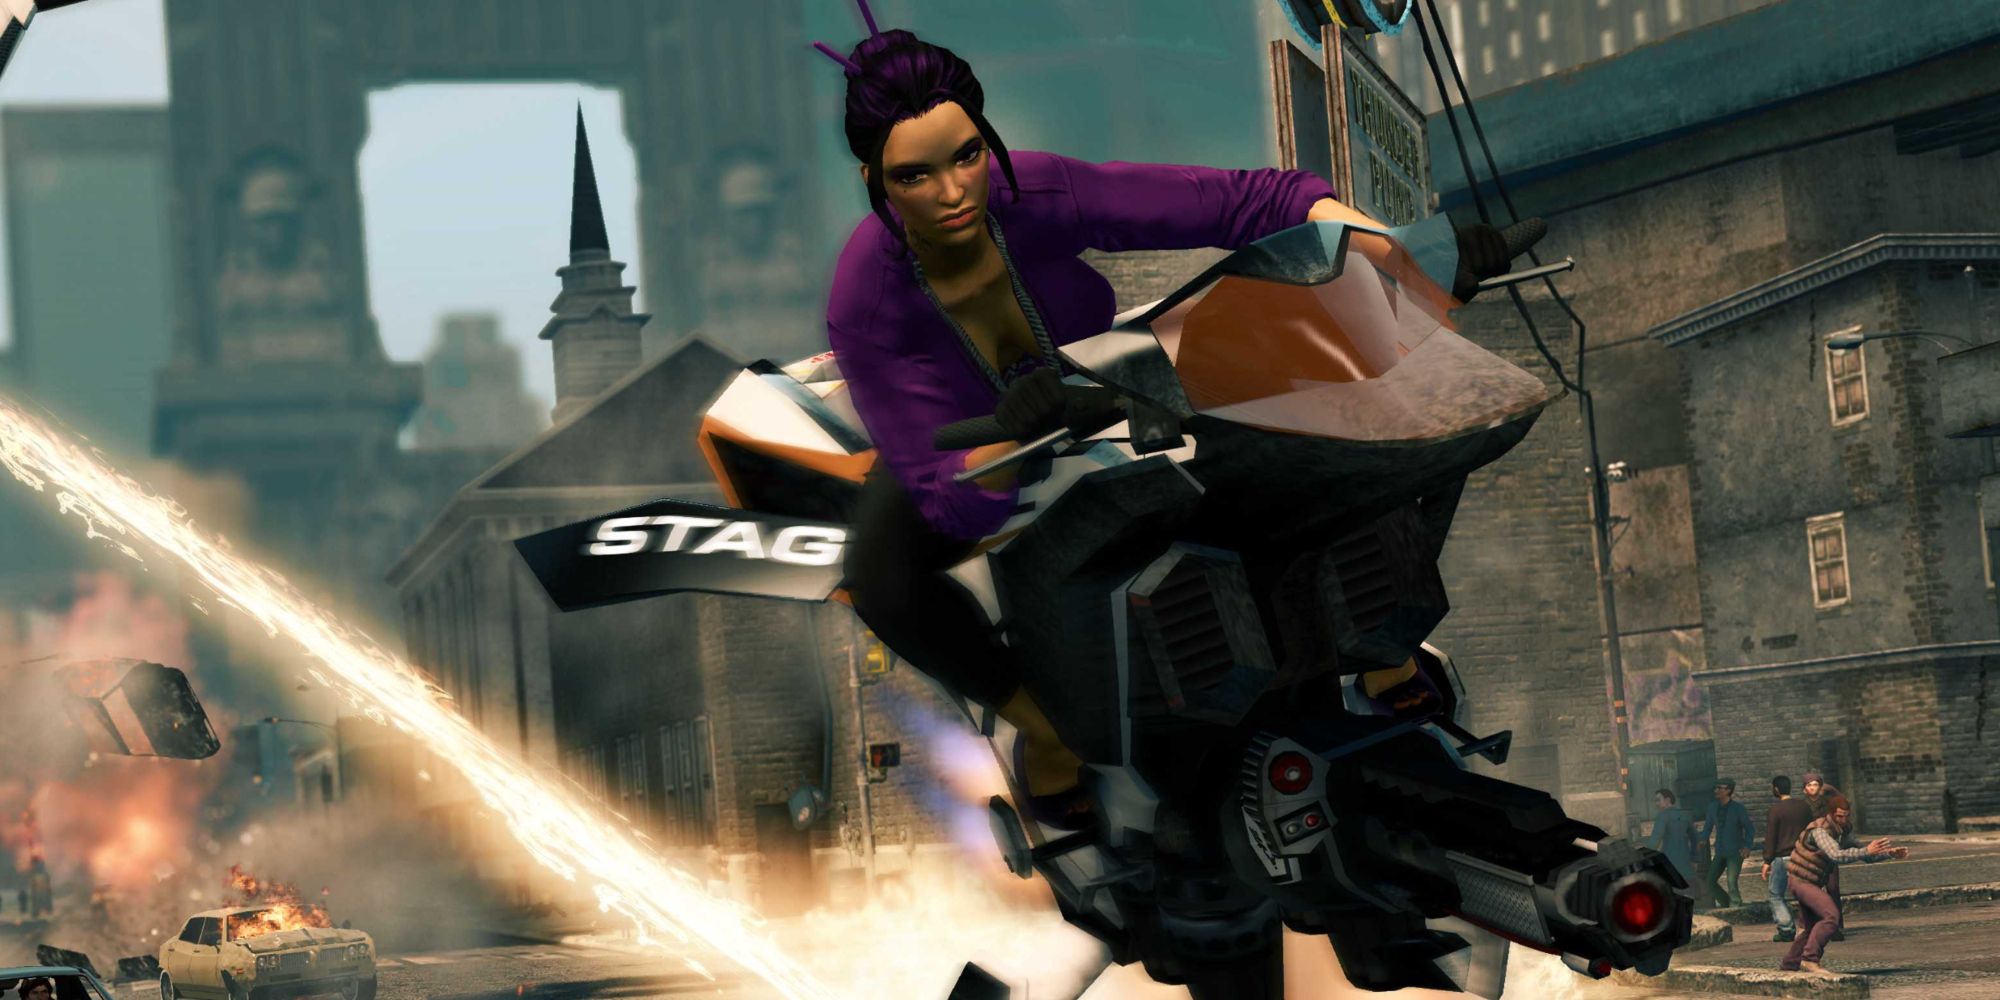 Saints Row Screenshot Of The Protagonist Riding a Specter